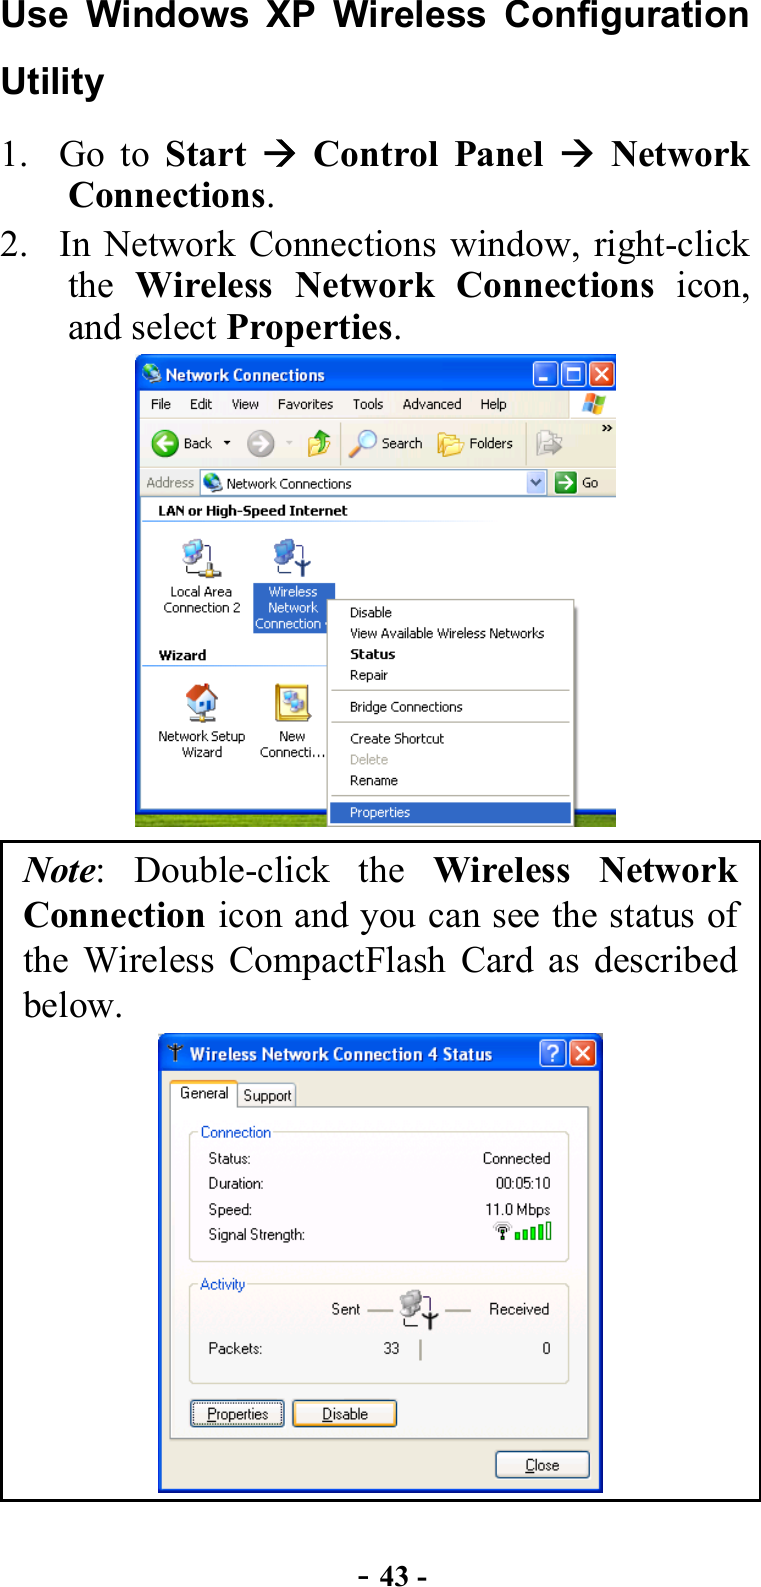  - 43 - Use Windows XP Wireless Configuration Utility 1. Go to Start   Control Panel  Network Connections. 2.  In Network Connections window, right-click the  Wireless Network Connections icon, and select Properties.  Note: Double-click the Wireless Network Connection icon and you can see the status of the Wireless CompactFlash Card as described below.  